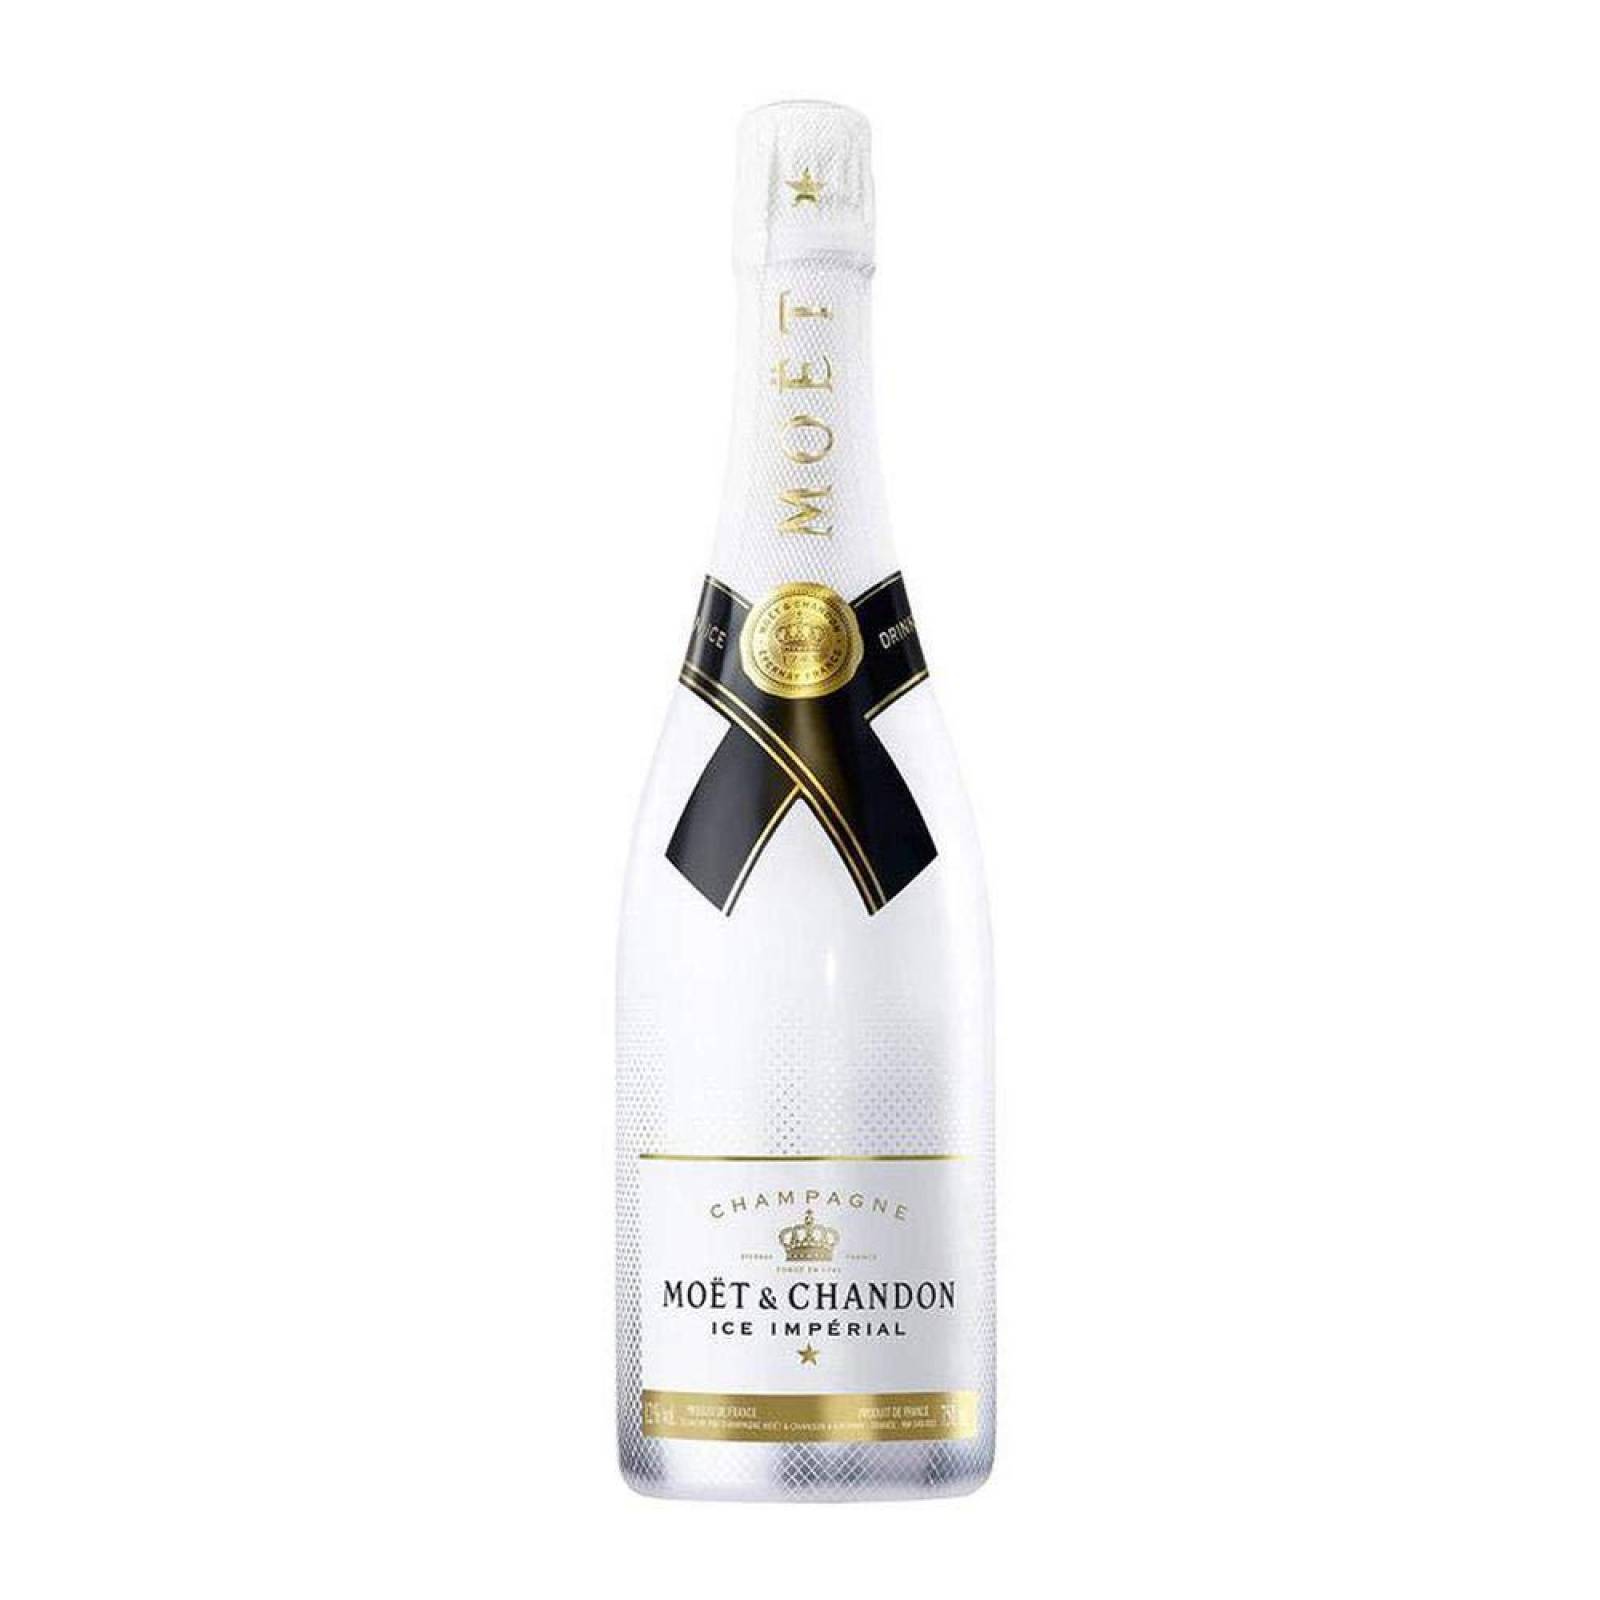 Champagne Moet Chandon Ice Imperial 1.5 L 